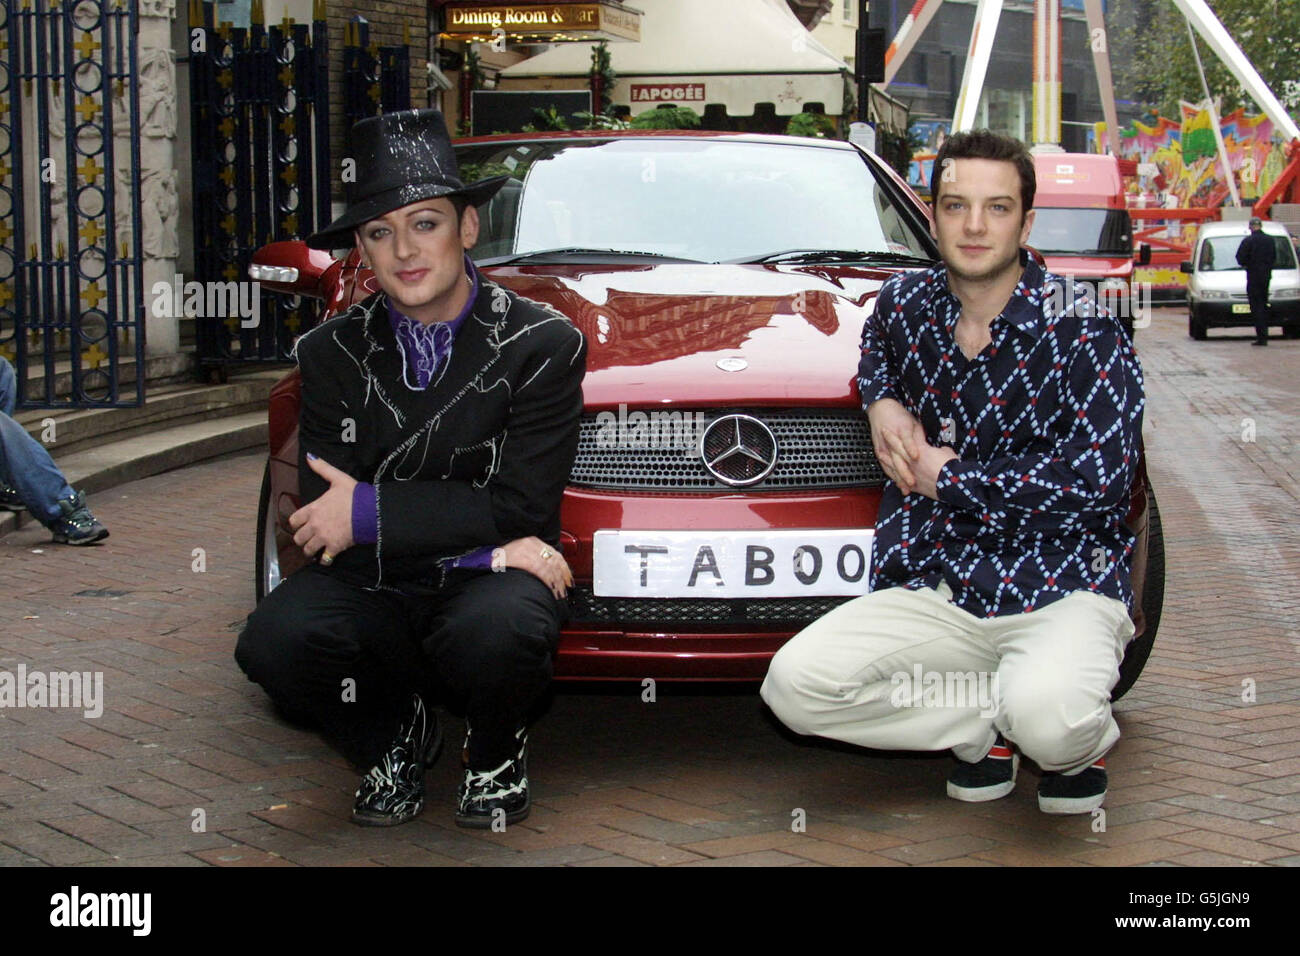 Culture Club's Boy George (R) poses with Euan Morton during a photocall in London,where it was announced that Morton will make his West End debut, when he plays singer/DJ in Taboo, a musical with music and lyrics by George based on the 80's pop era. Stock Photo